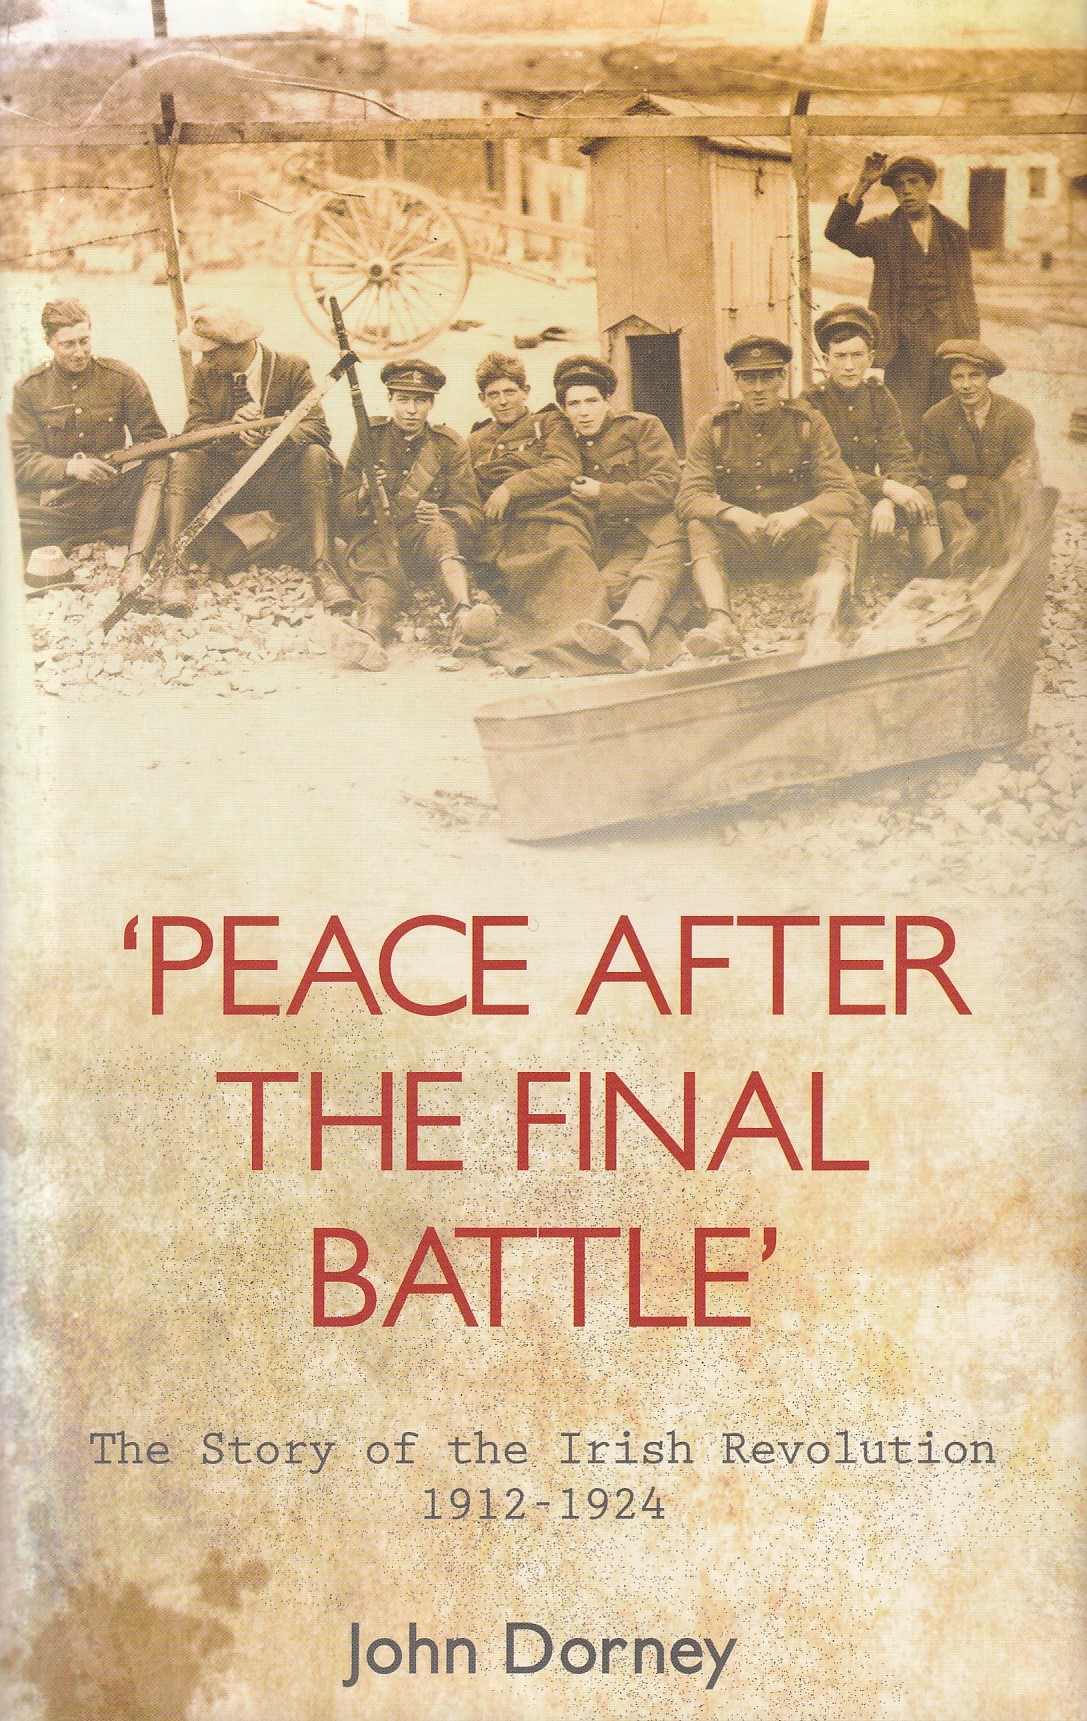 ‘Peace after the Final Battle’: The Story of the Irish Revolution 1912-1924 | John Dorney | Charlie Byrne's